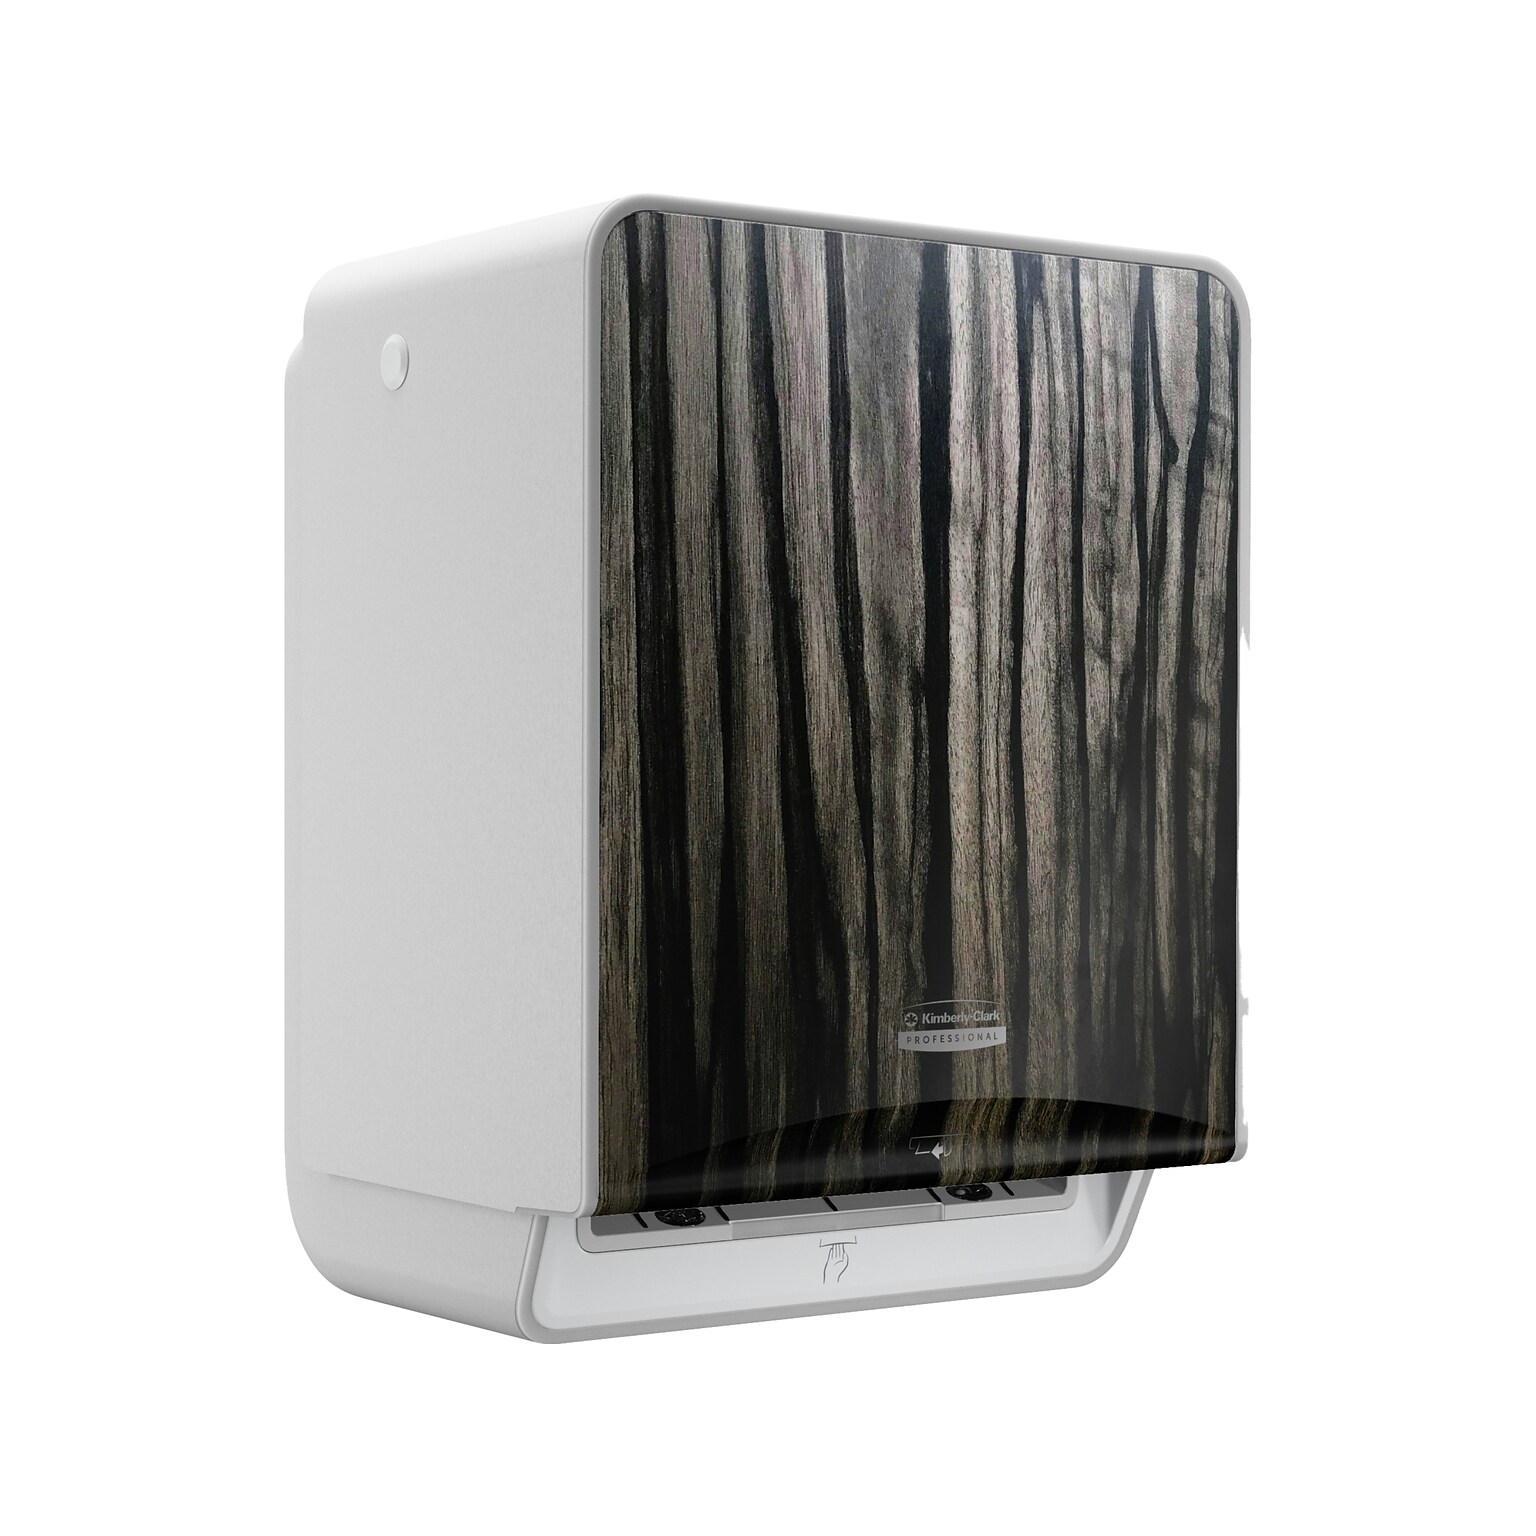 Kimberly-Clark Professional ICON Automatic Roll Towel Dispenser with Faceplate, Brushed Gray/Ebony Wood Grain (58750)